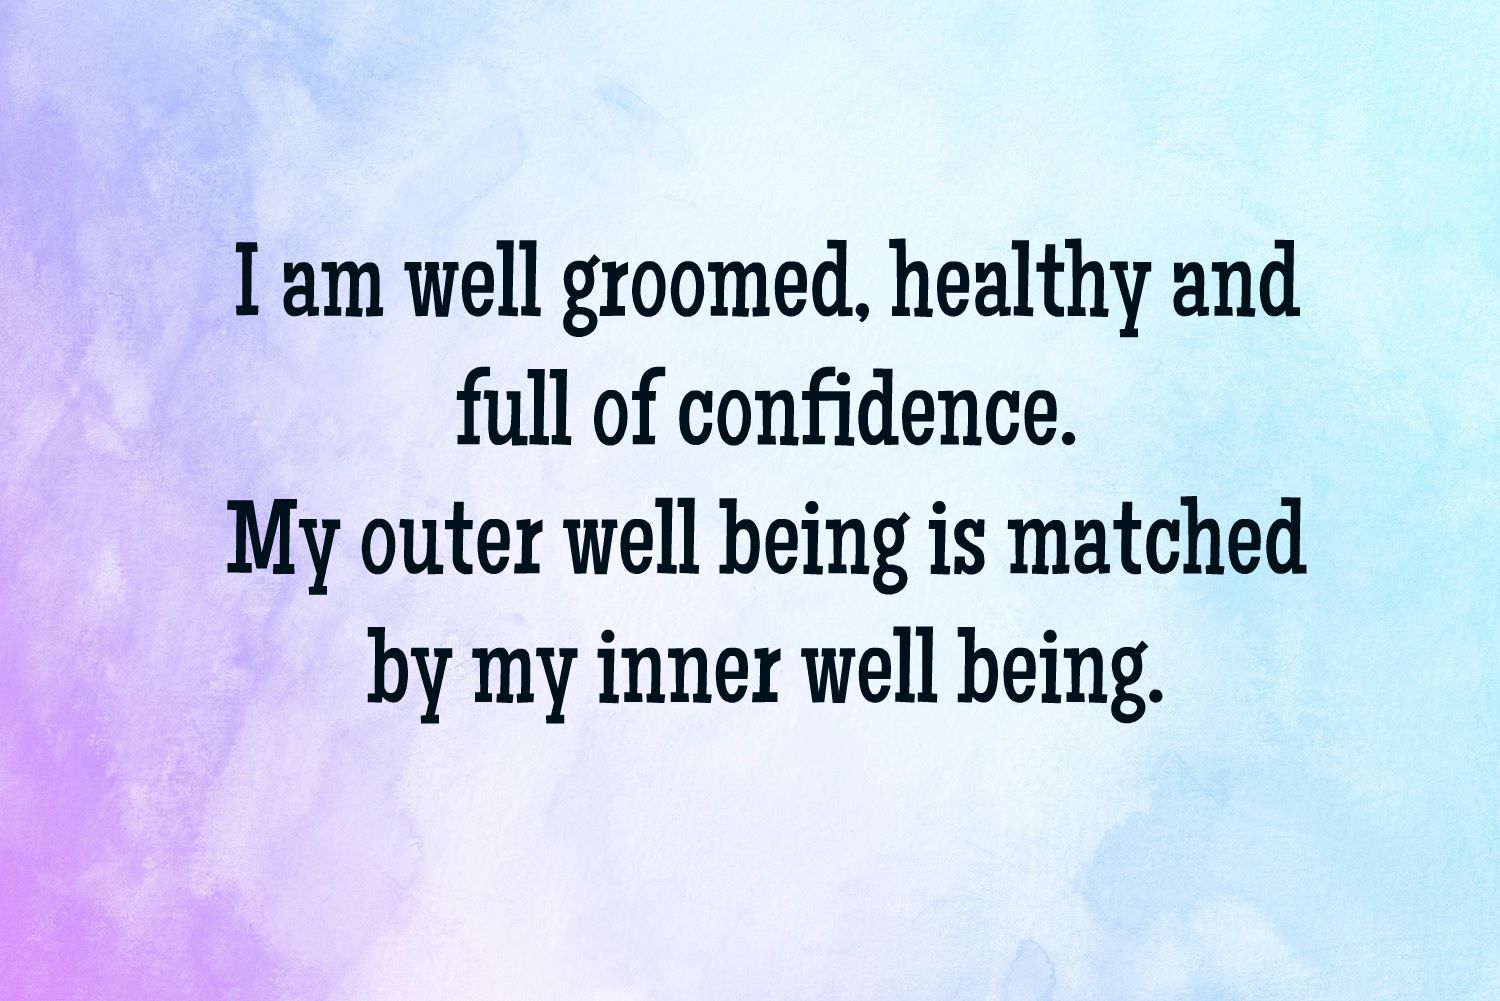 Confidence Affirmations